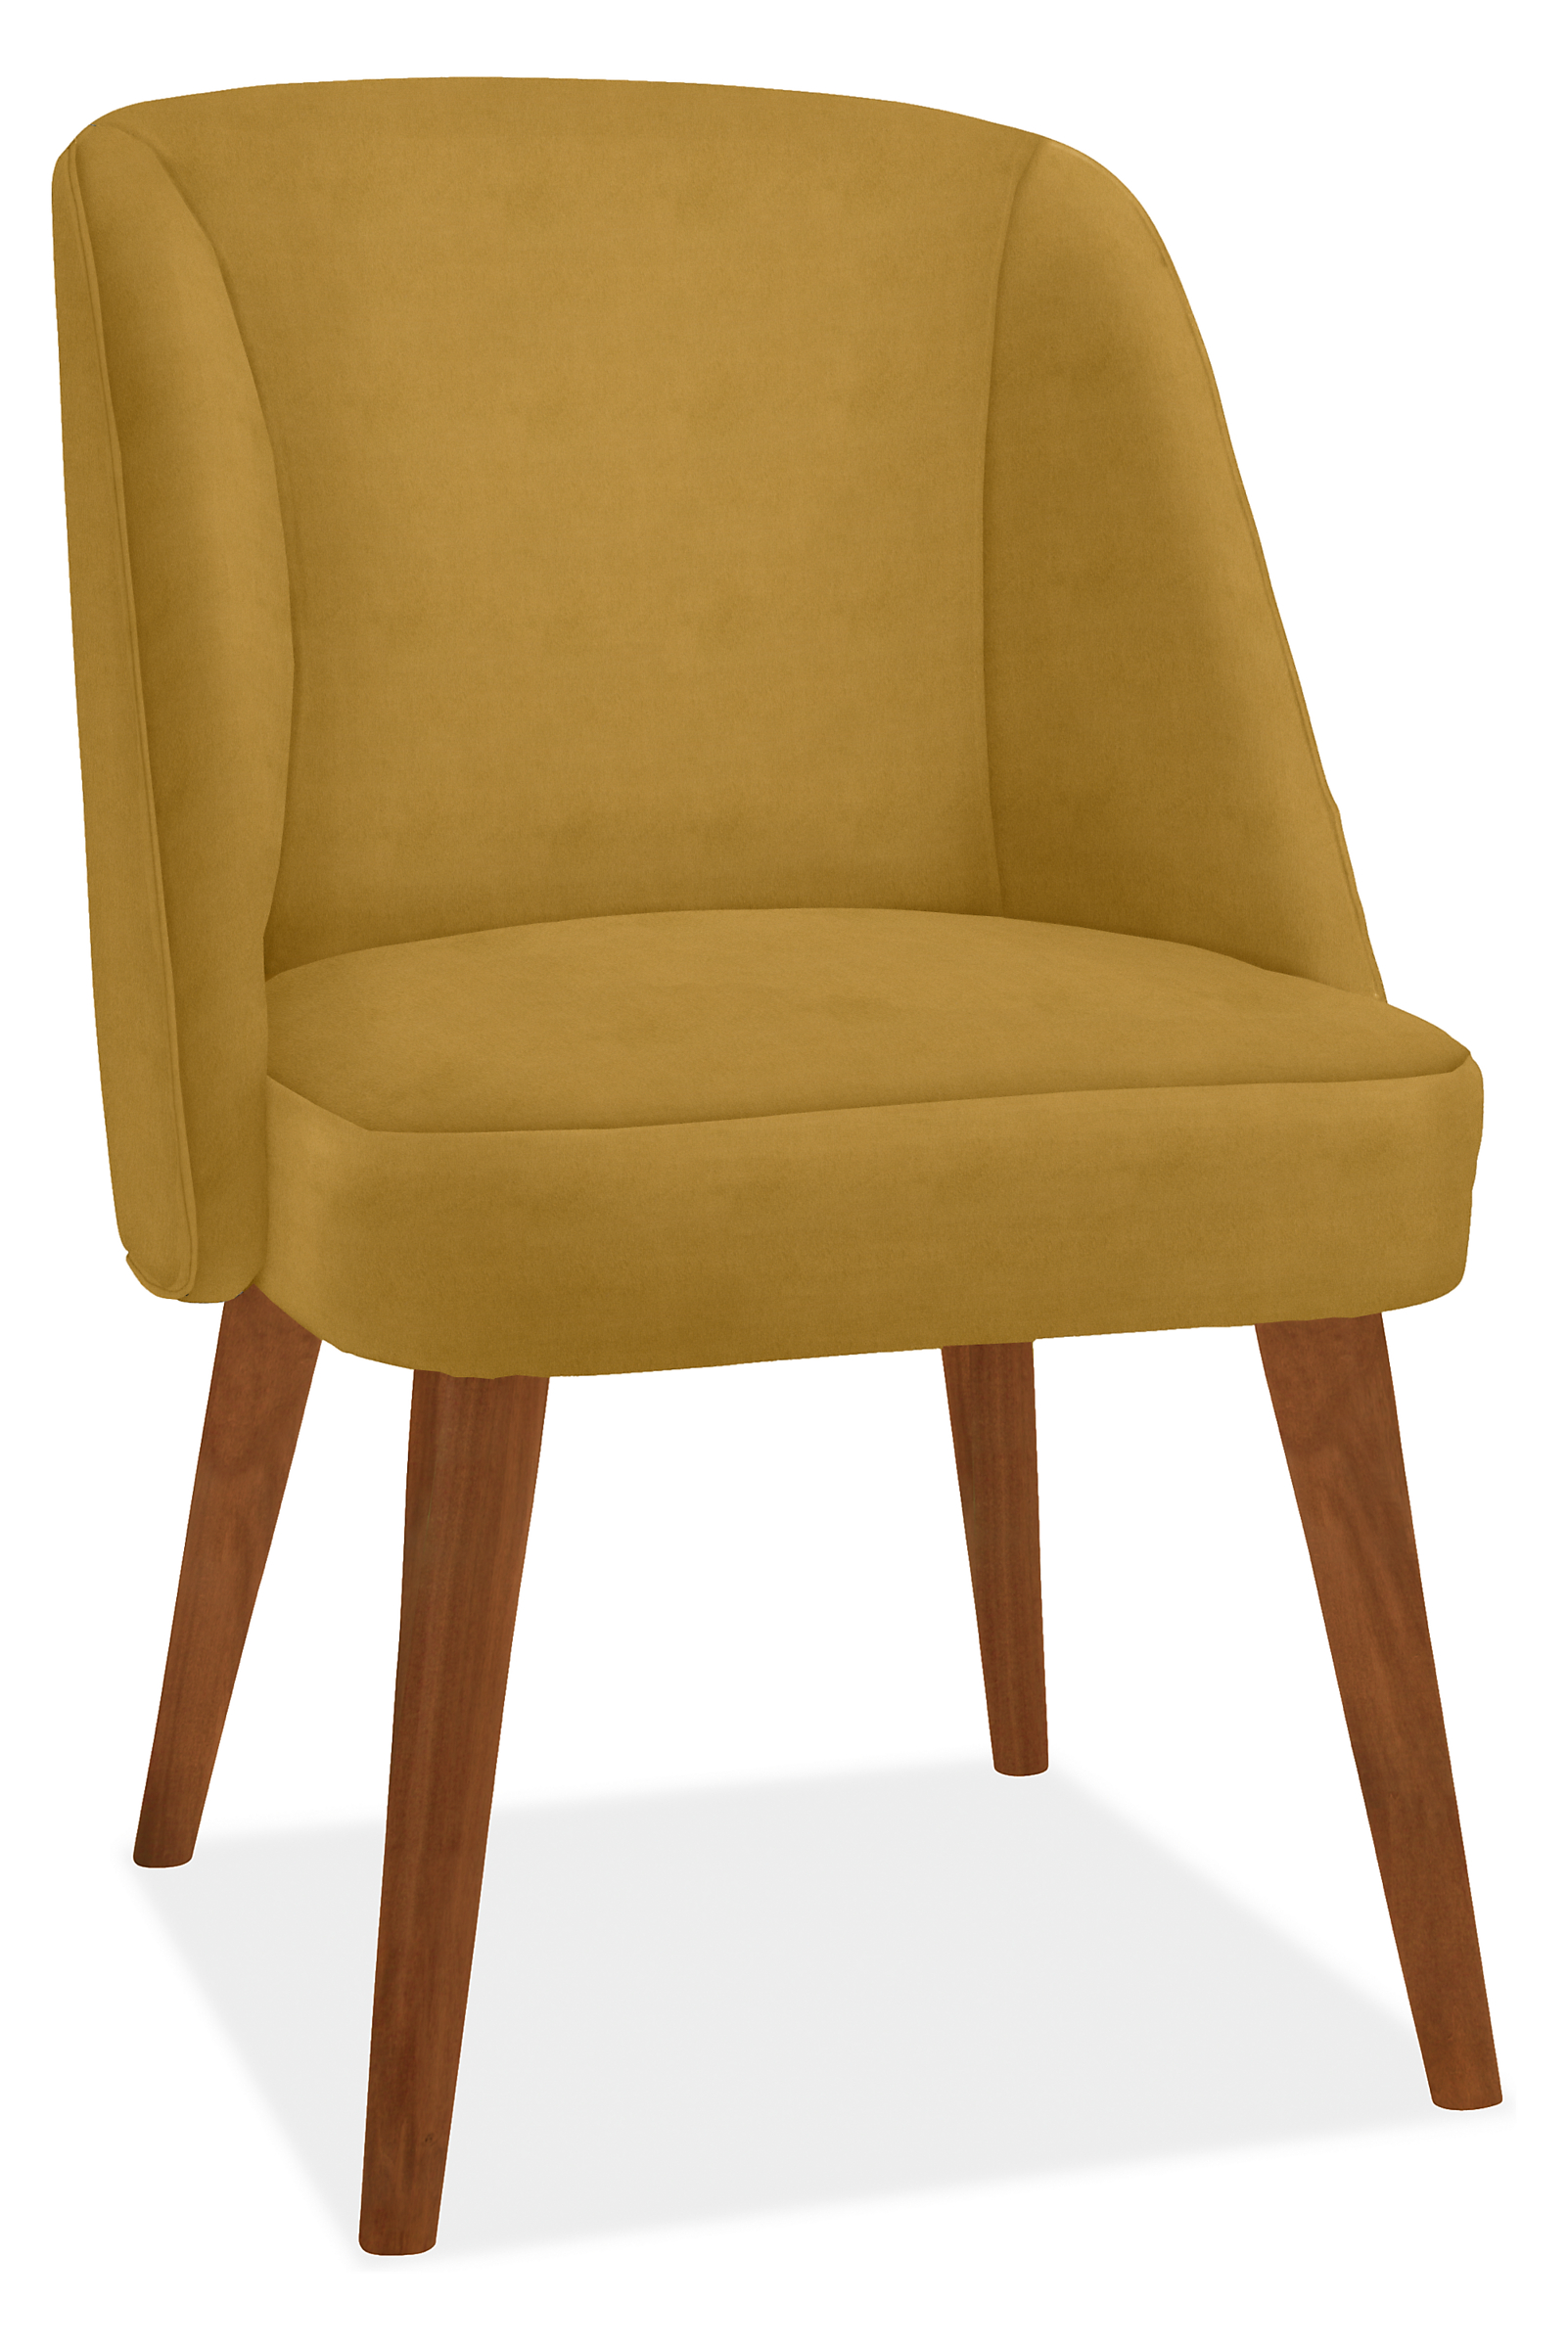 Cora Side Chair in View Mustard with Mocha Legs